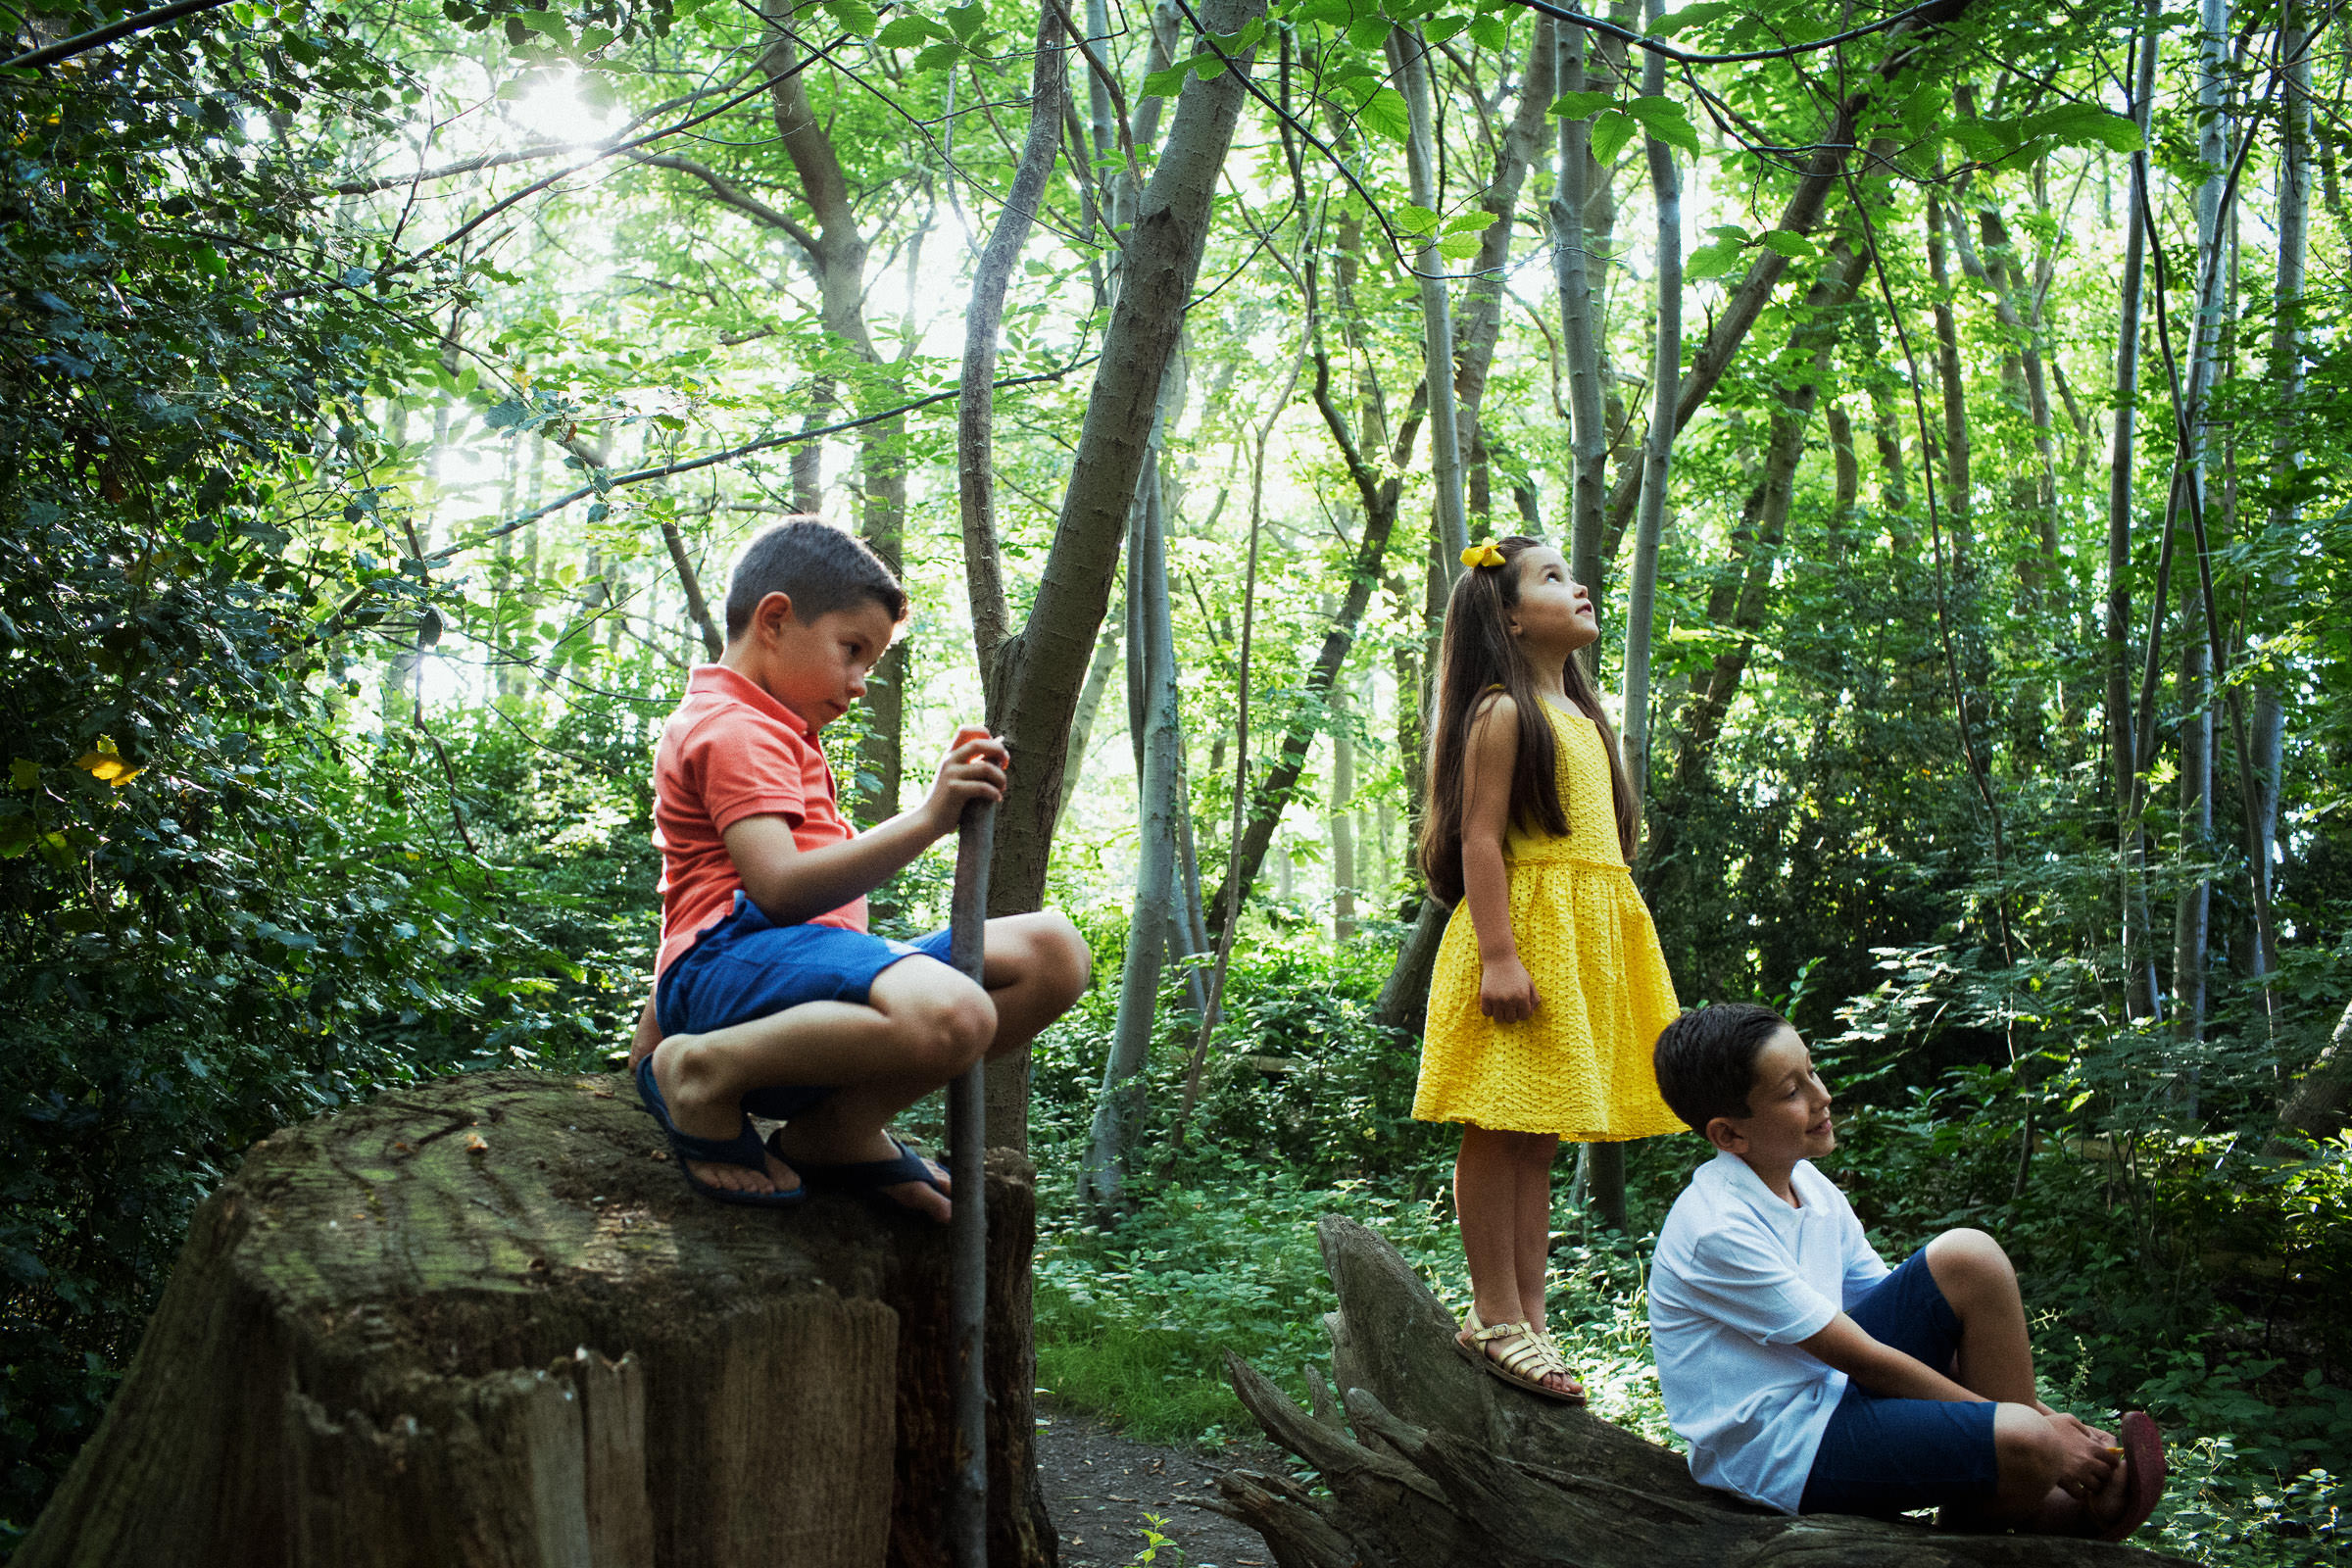 A natural family photoshoot in Norsey Woods, Billericay in Essex. Three children in the woods not looking at the camera. Essex family photography.